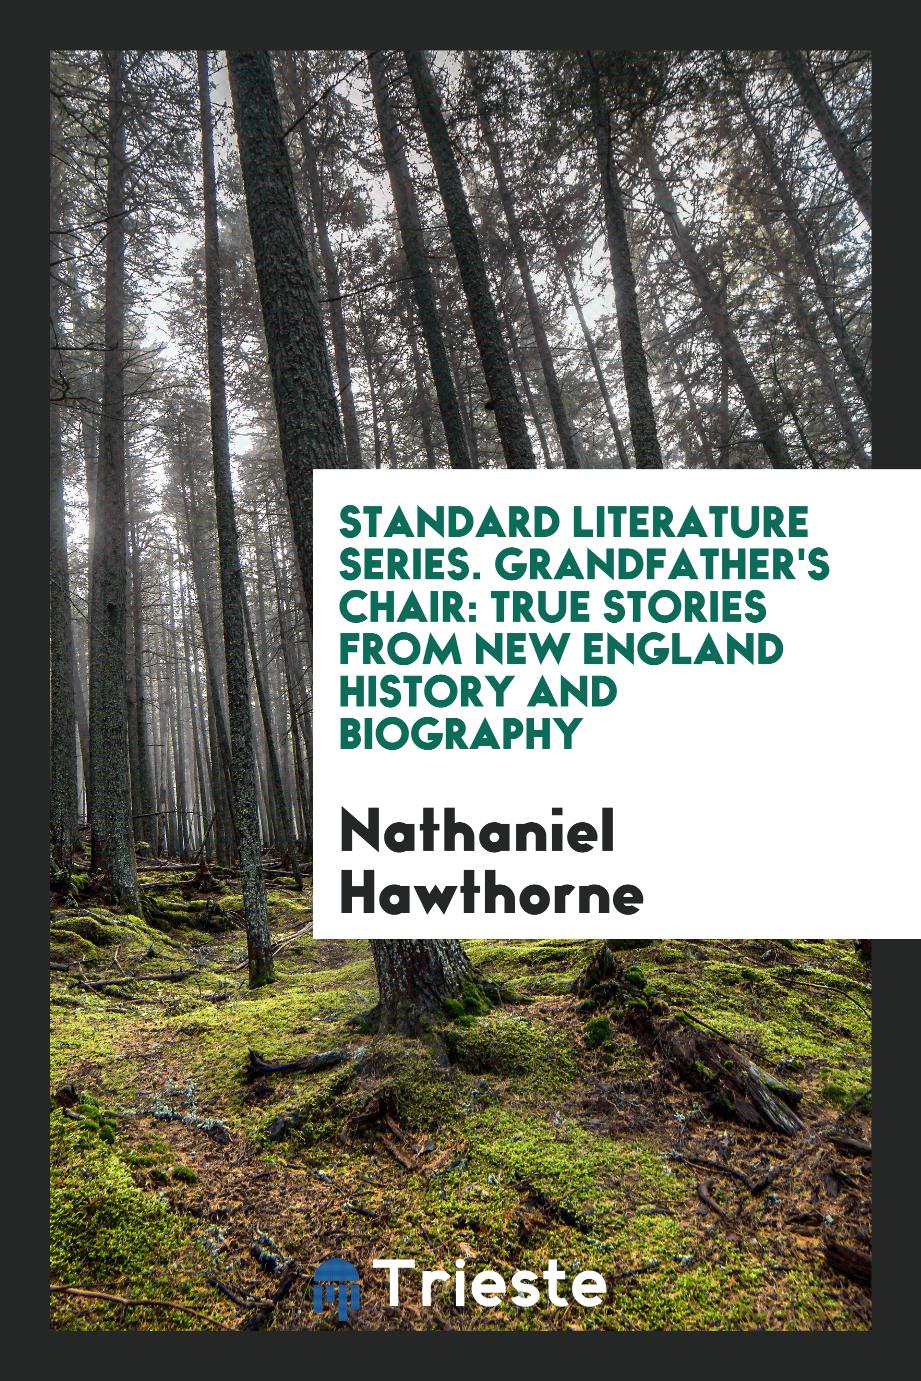 Nathaniel Hawthorne - Standard Literature Series. Grandfather's Chair: True Stories from New England History and Biography